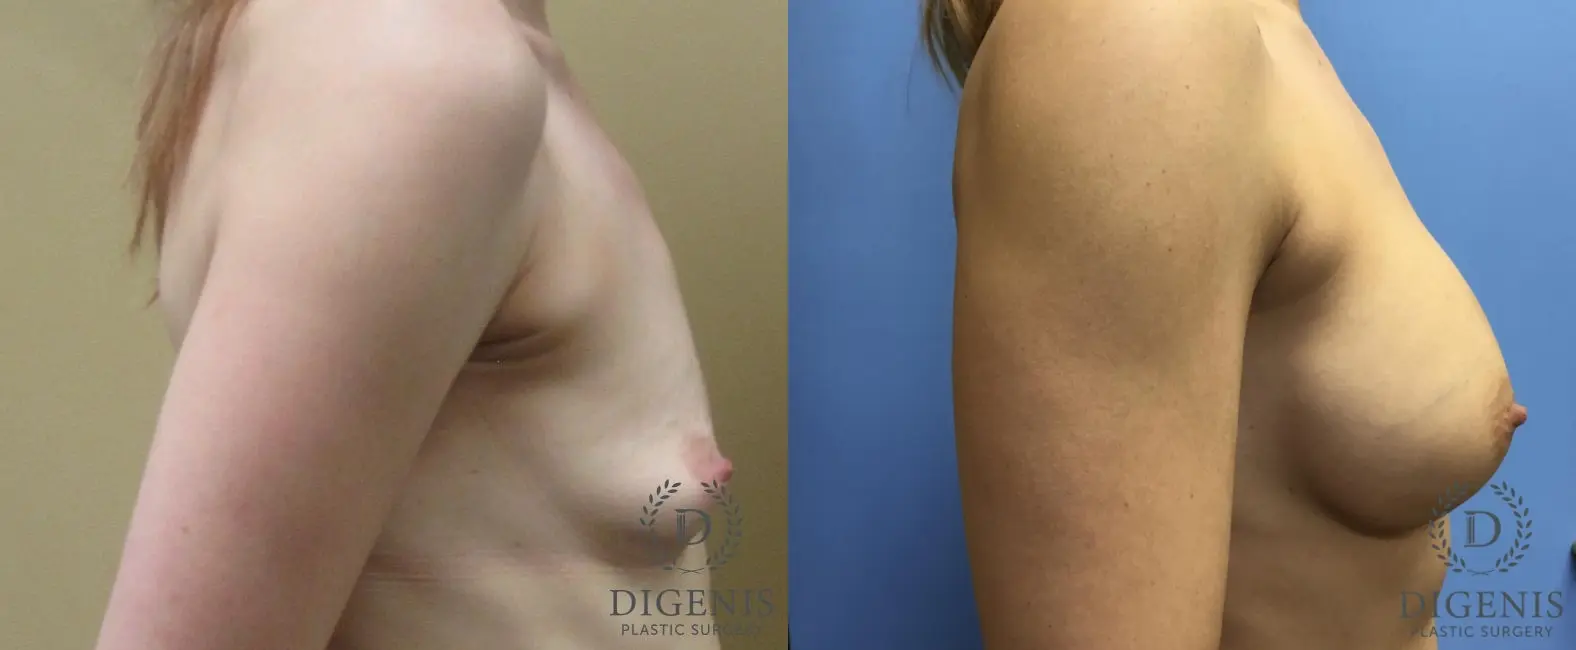 Breast Augmentation: Patient 3 - Before and After 3